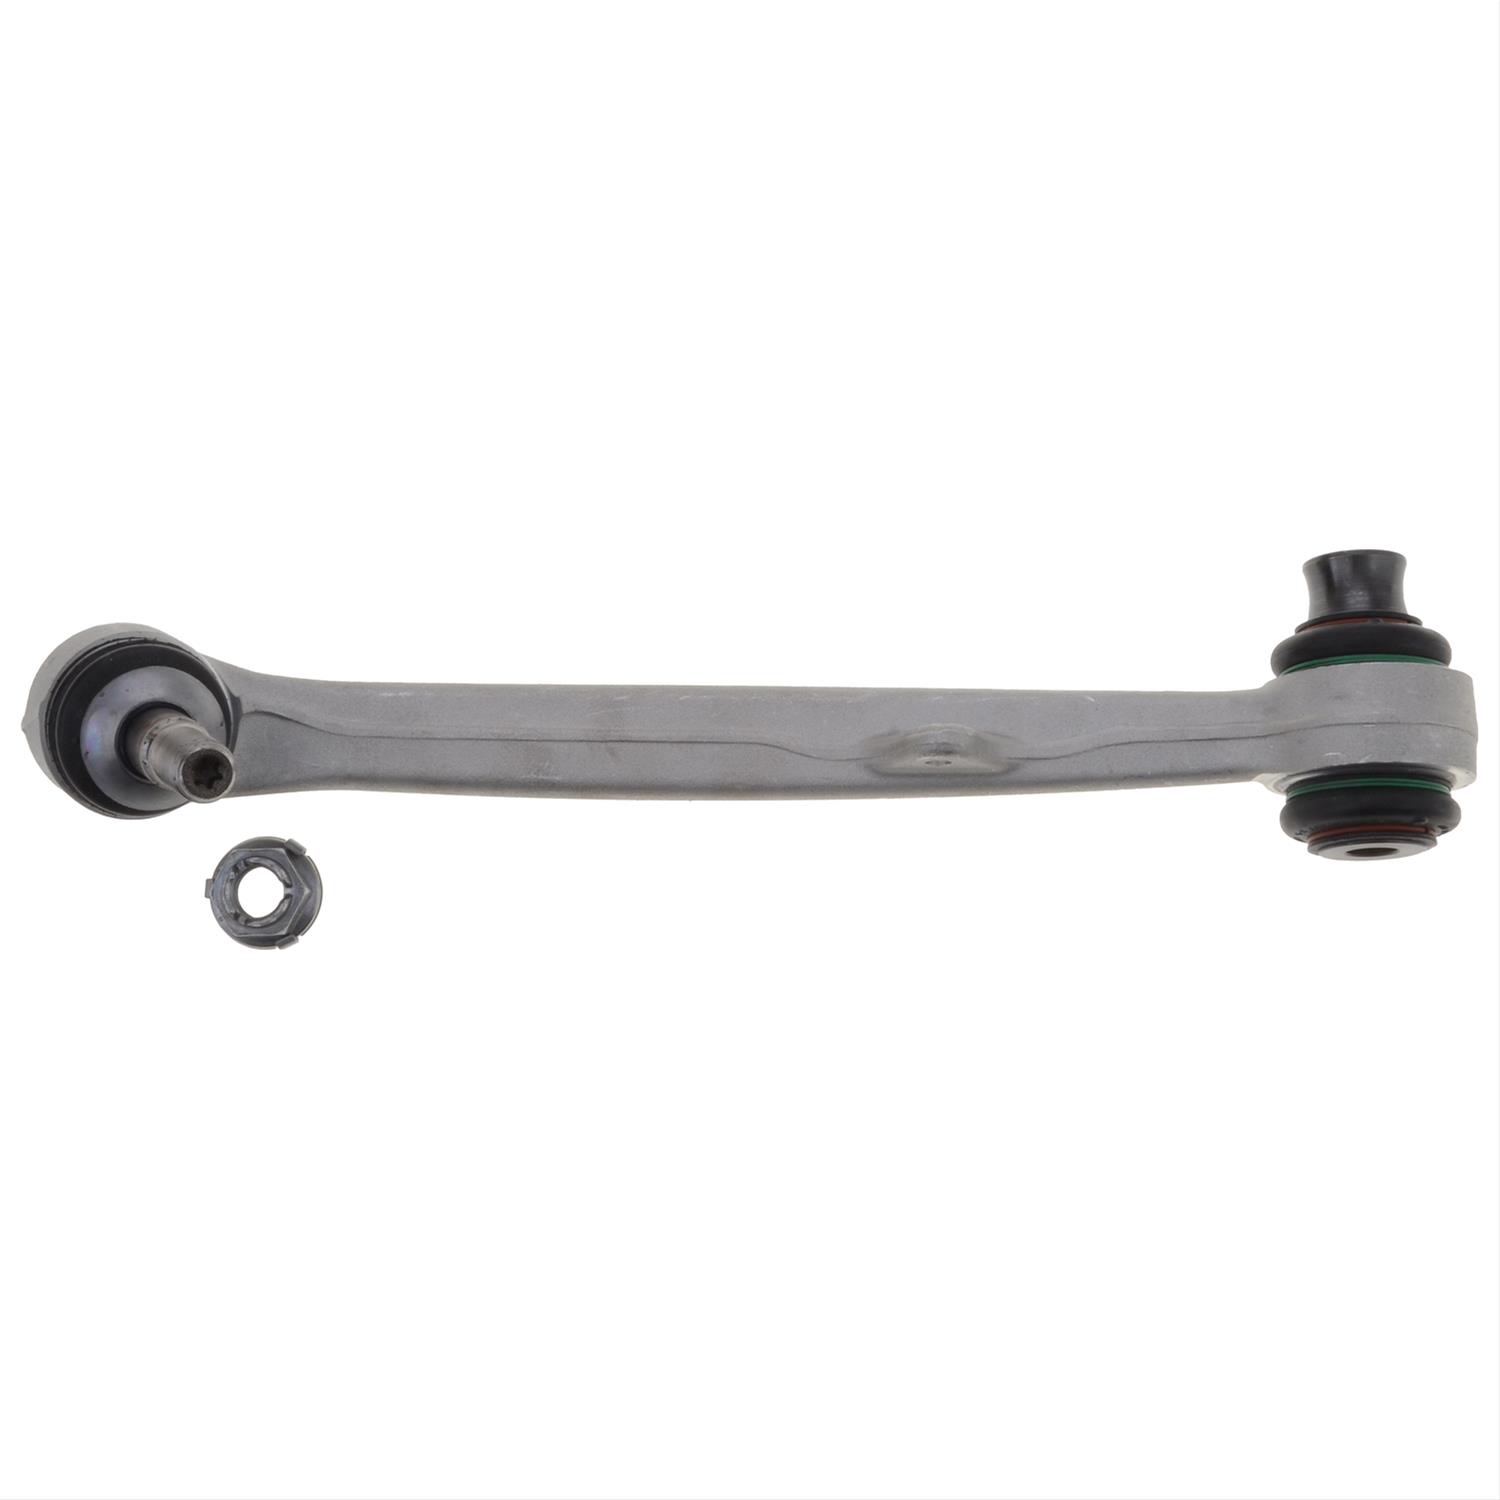 TRW Automotive JTC1426 TRW Replacement Control Arms | Summit Racing